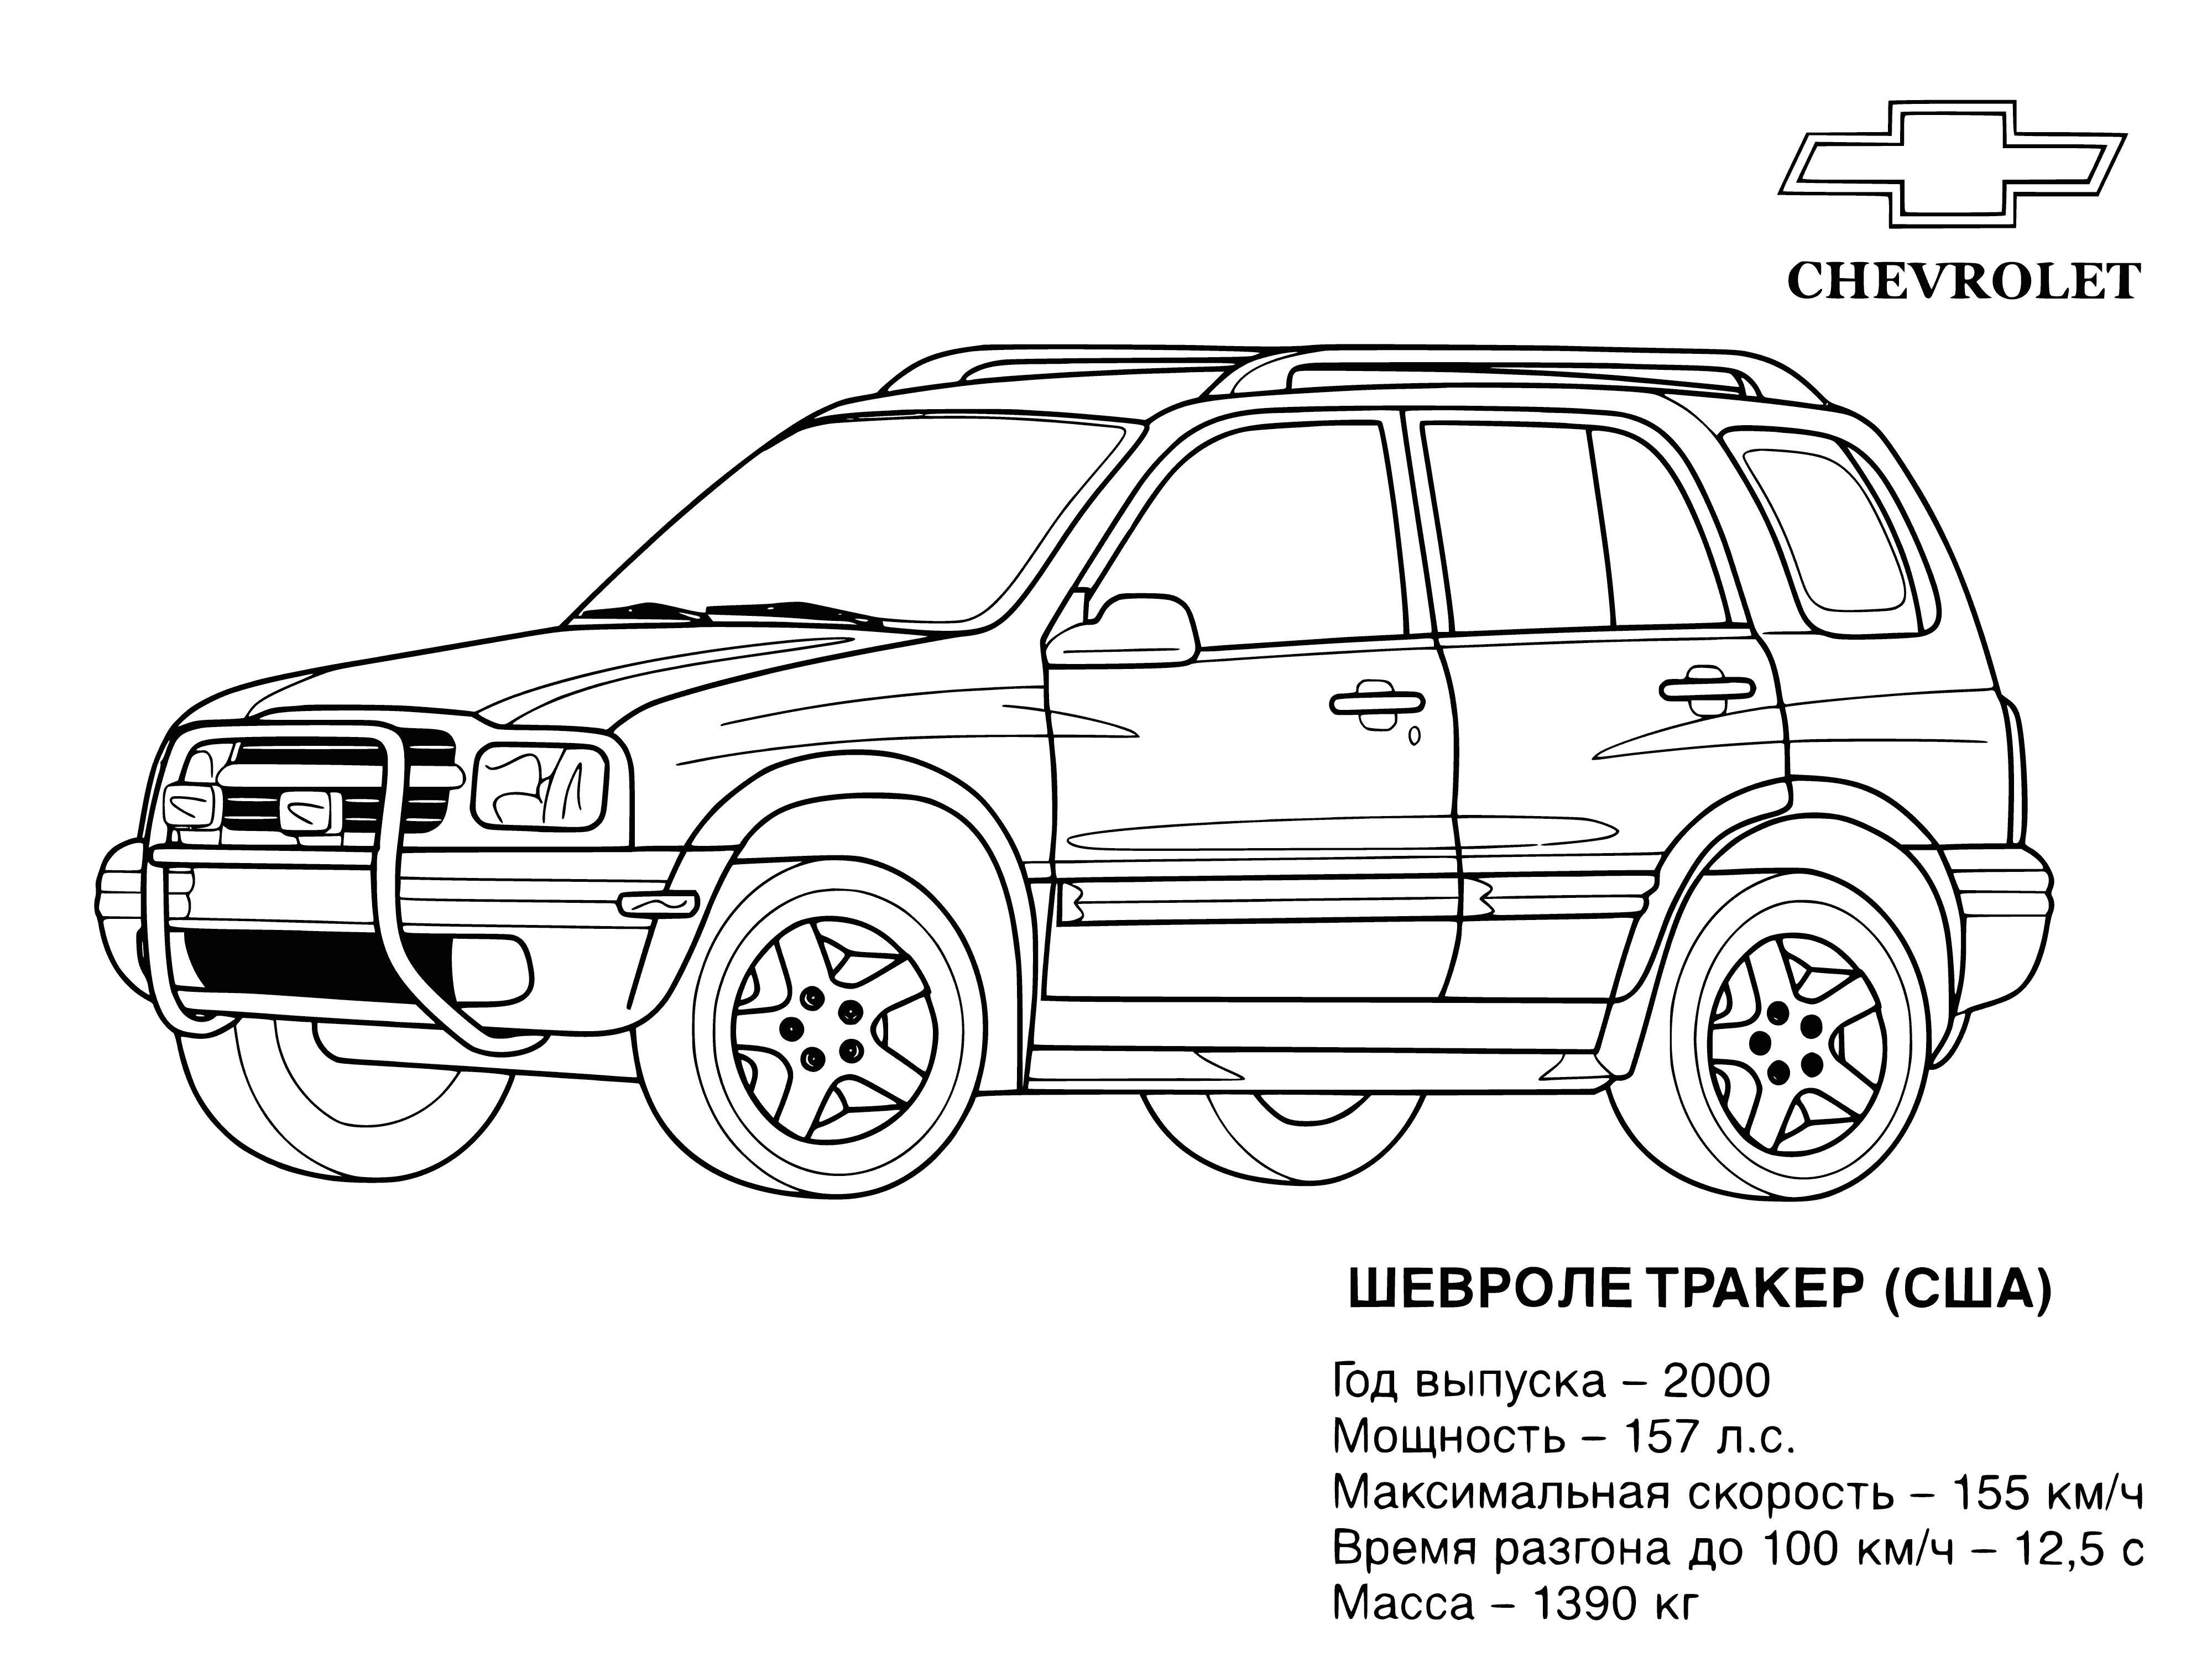 coloring page: Jeeps are small/roomy 4-wheeled vehicles w/ removable/folding top. Used for off-road adventures, they're favored by drivers who enjoy rough terrains.